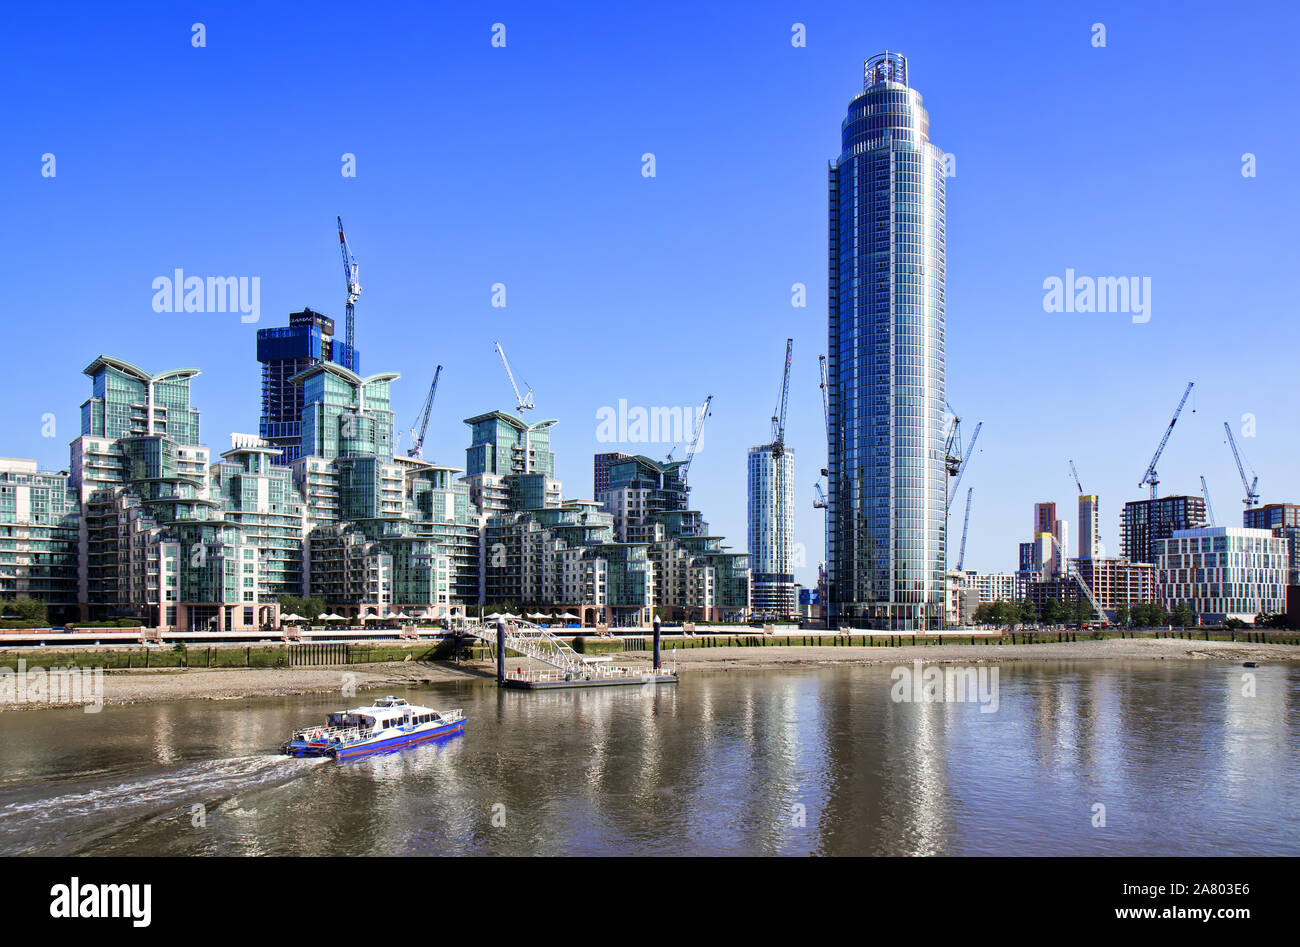 St George Wharf Tower, also known as the Vauxhall Tower, Vauxhall, London. Stock Photo